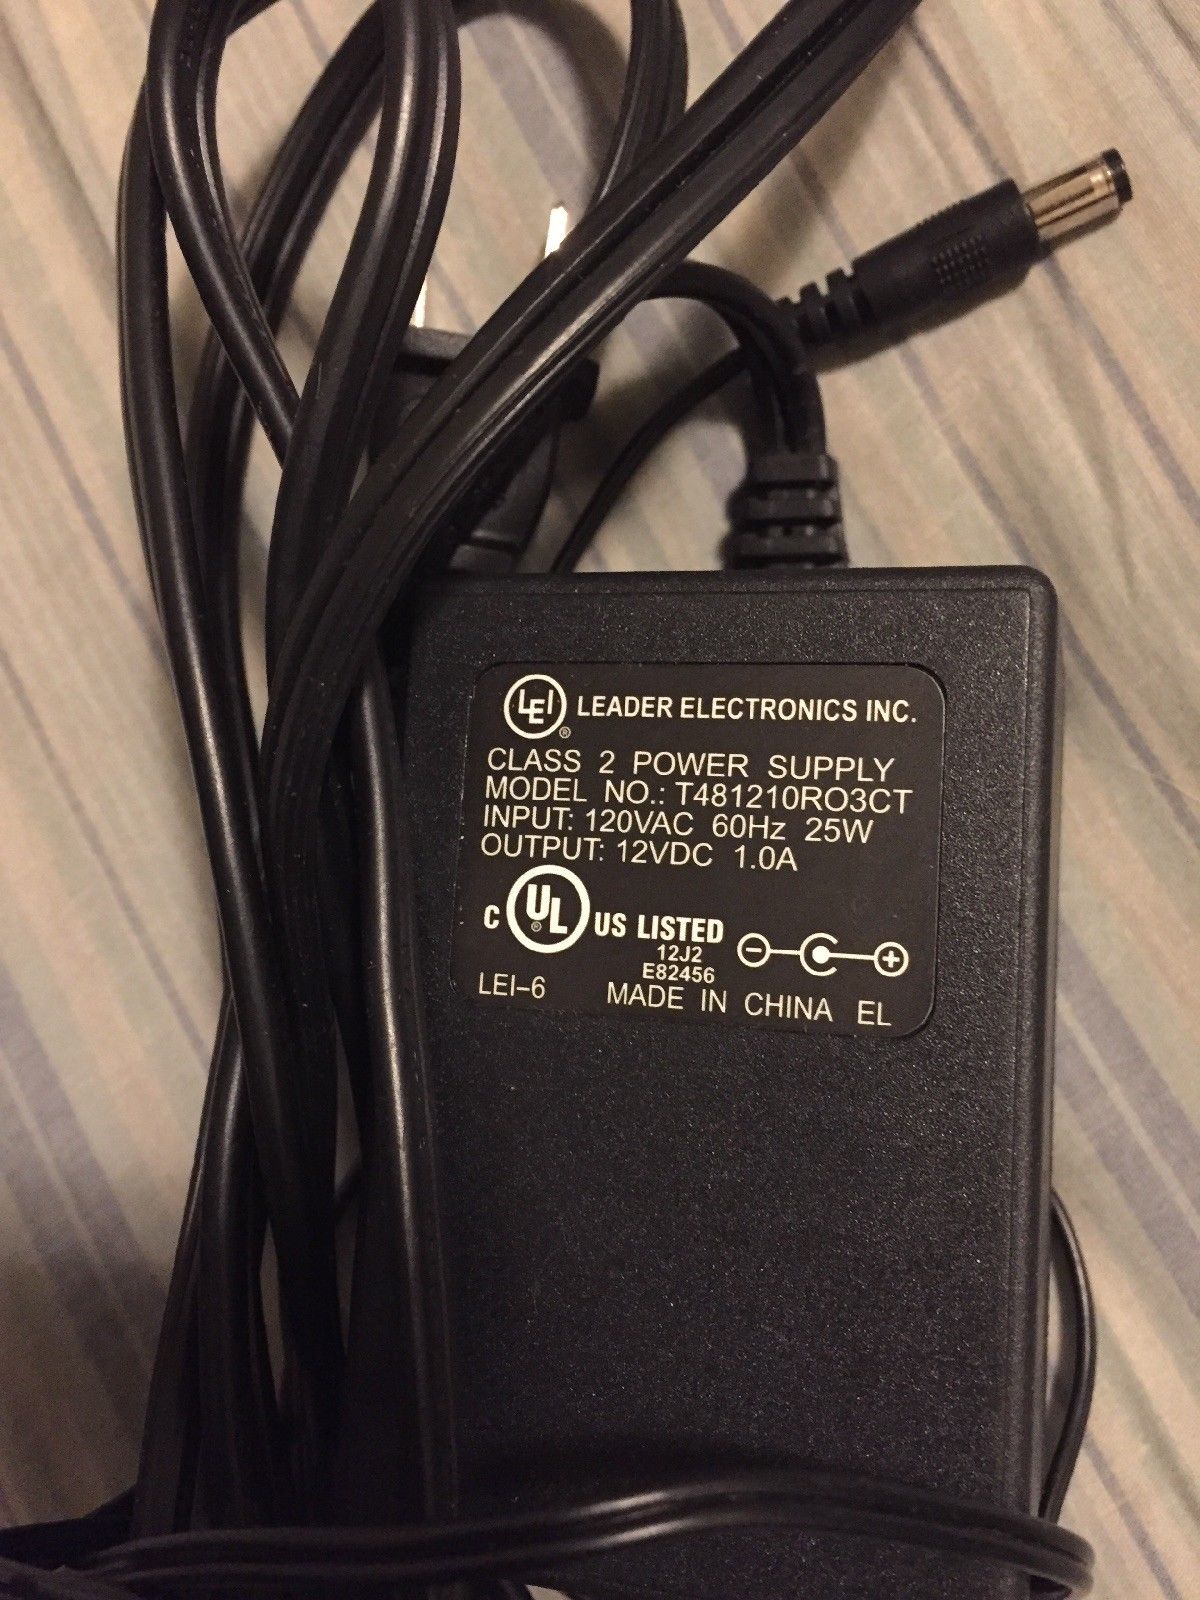 New Misc 12vdc 1.0a Power Adapter Cord LEI T481210RO3CT ac adapter - Click Image to Close